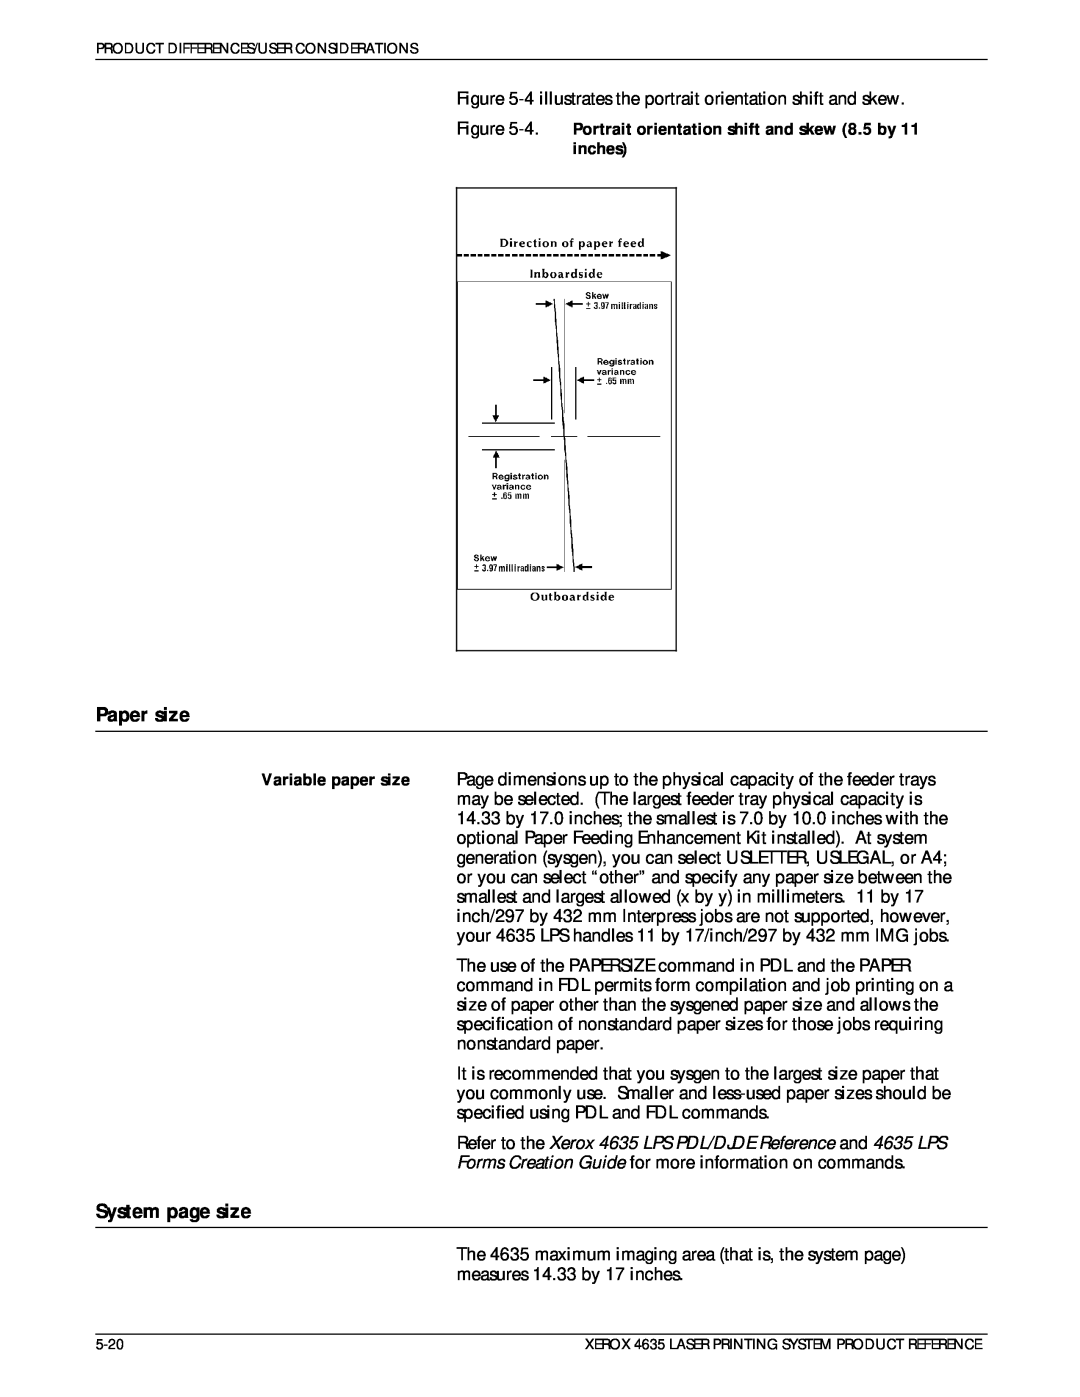 Xerox 721P83071 manual Paper size, System page size, 4. Portrait orientation shift and skew 8.5 by 11 inches 